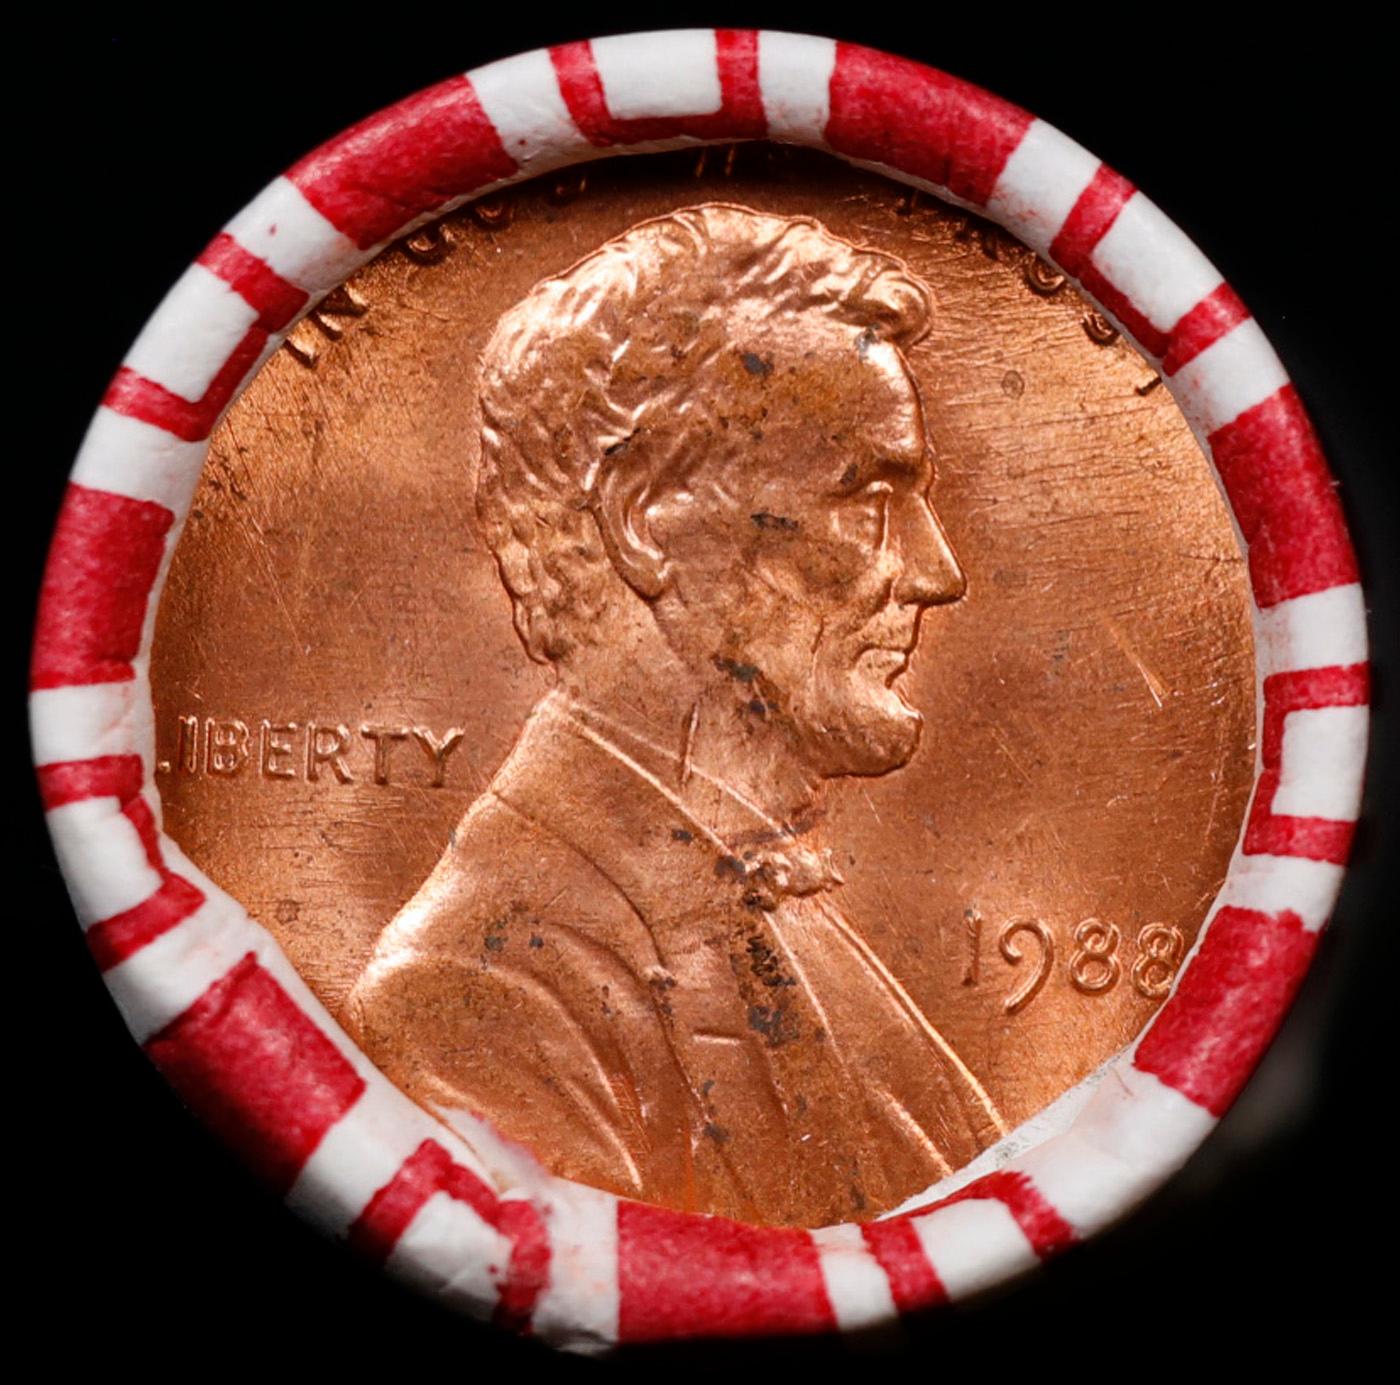 INSANITY The CRAZY Penny Wheel 1000’s won so far, WIN this 1988-p BU RED roll get 1-10 FREE